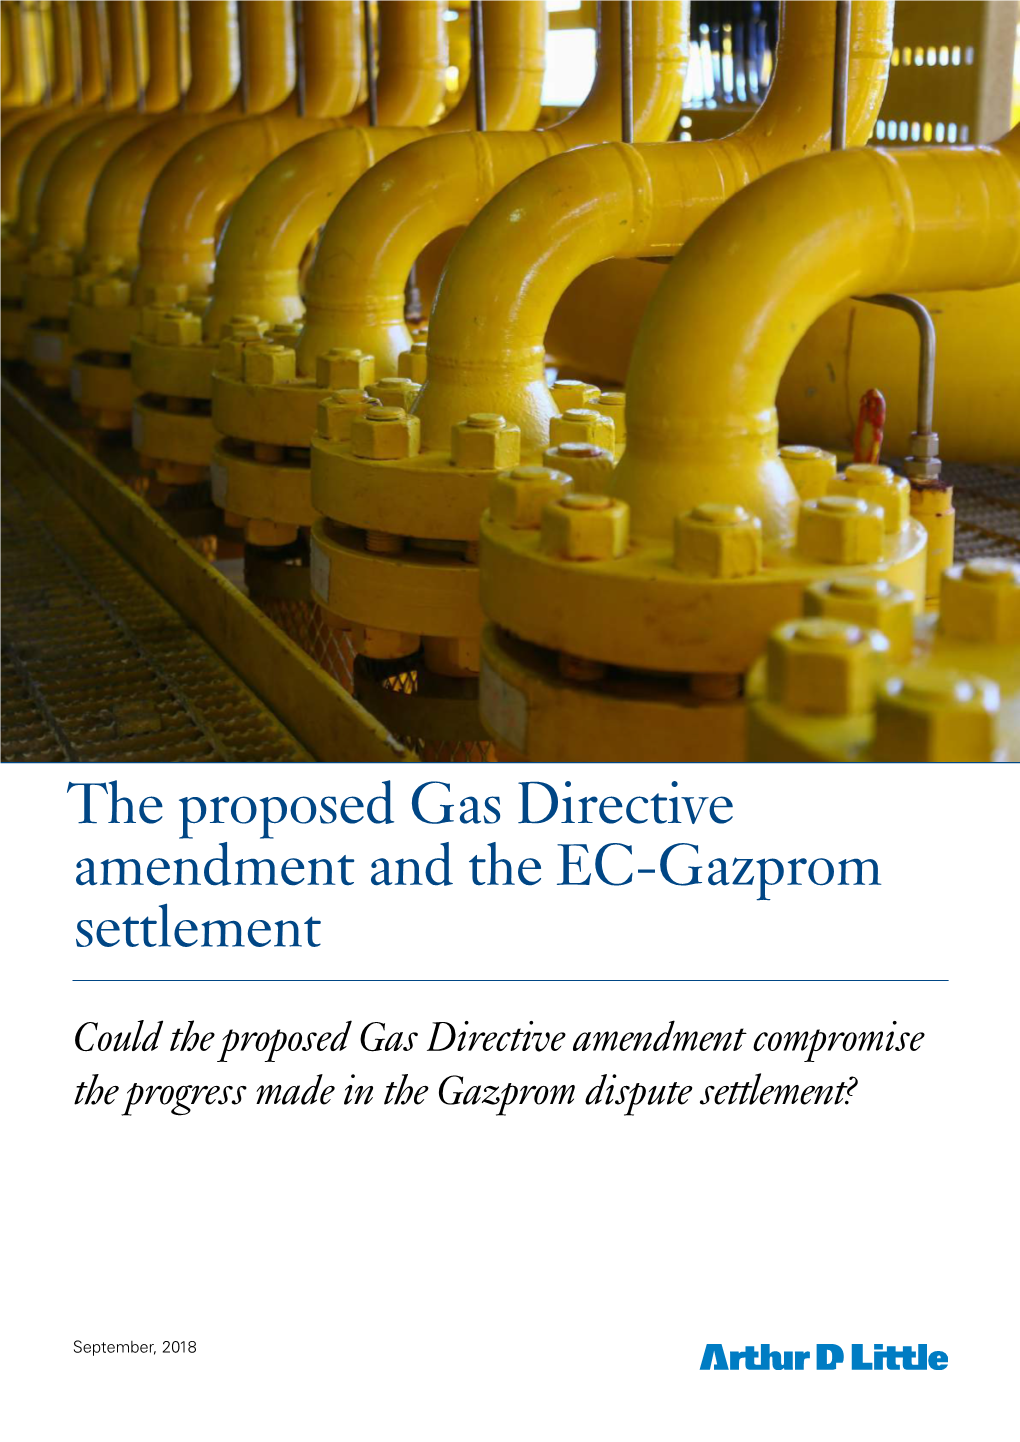 The Proposed Gas Directive Amendment and the EC-Gazprom Settlement